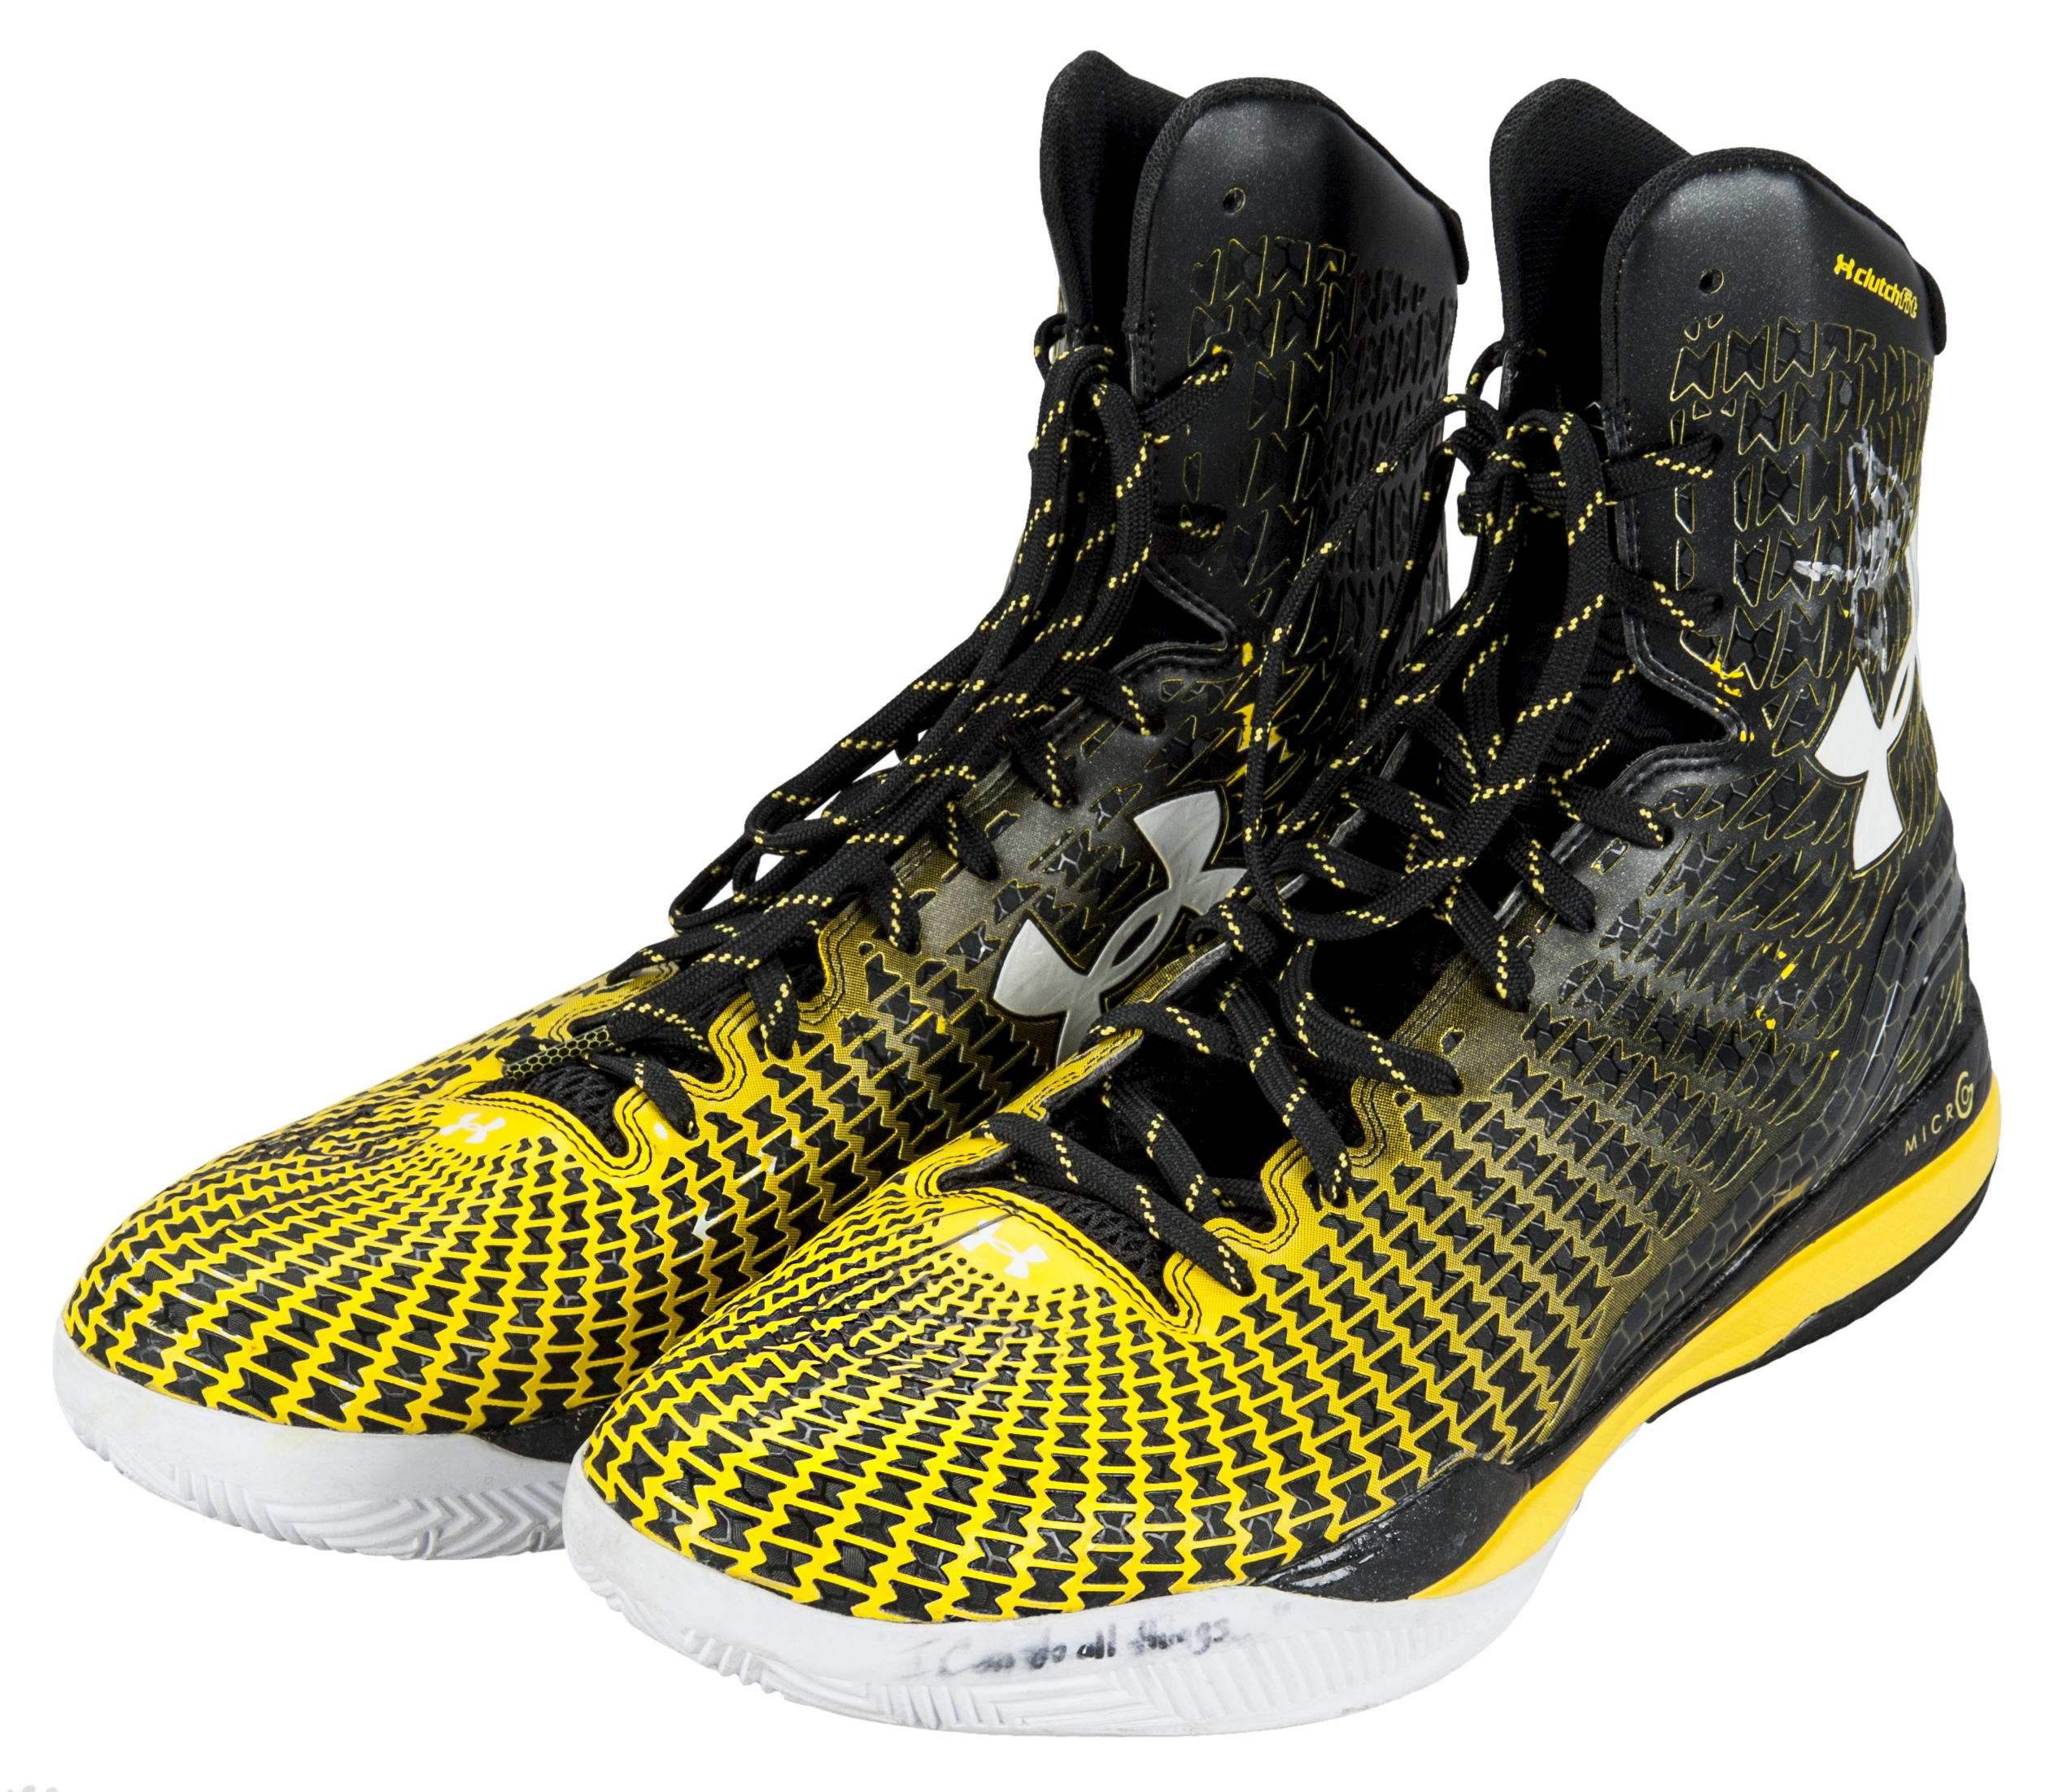 Curry 3 shoe sales disappointing says Under Armour Yahoo Sports